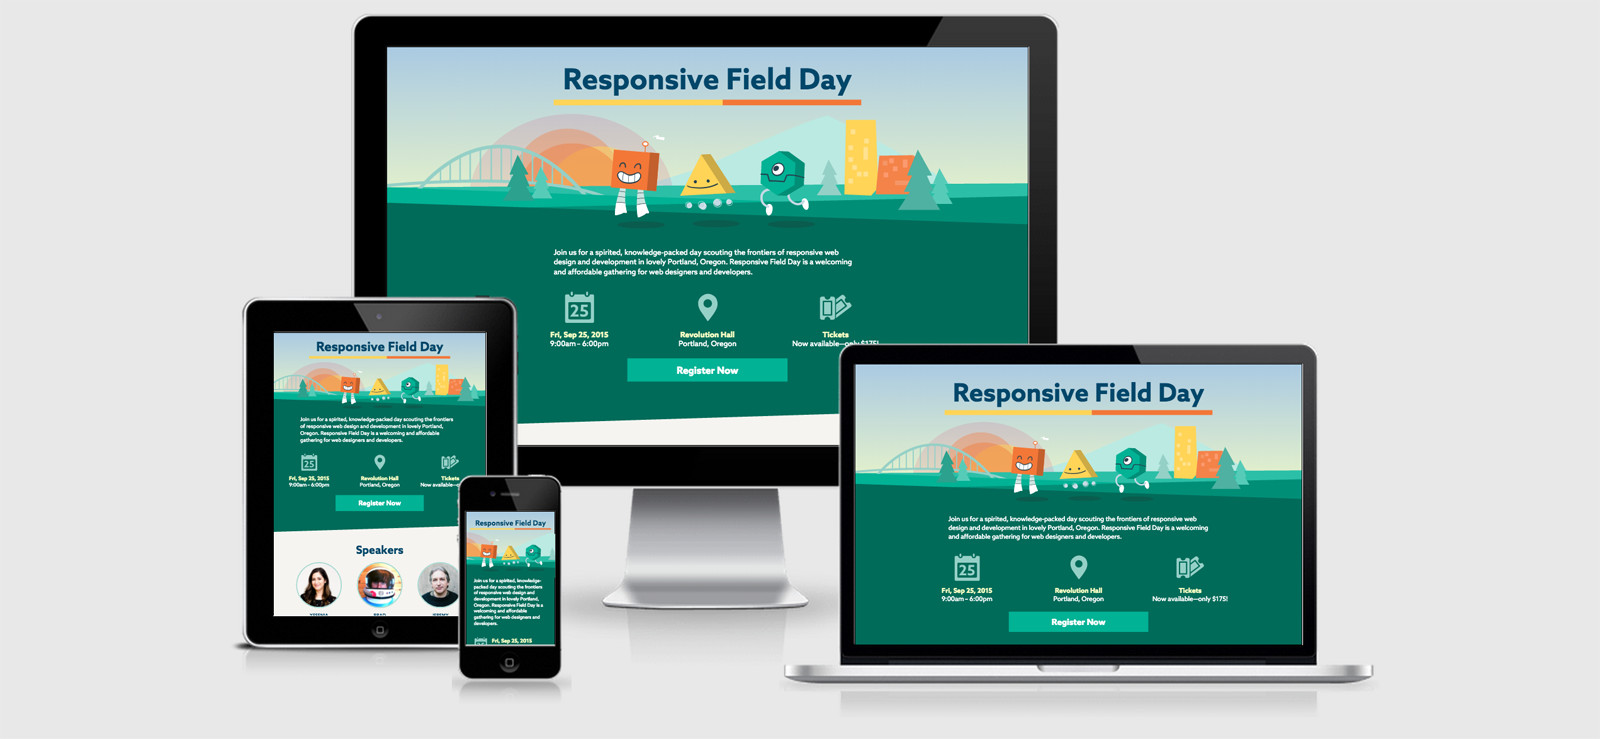 Responsive Field Day seen in 4 viewports